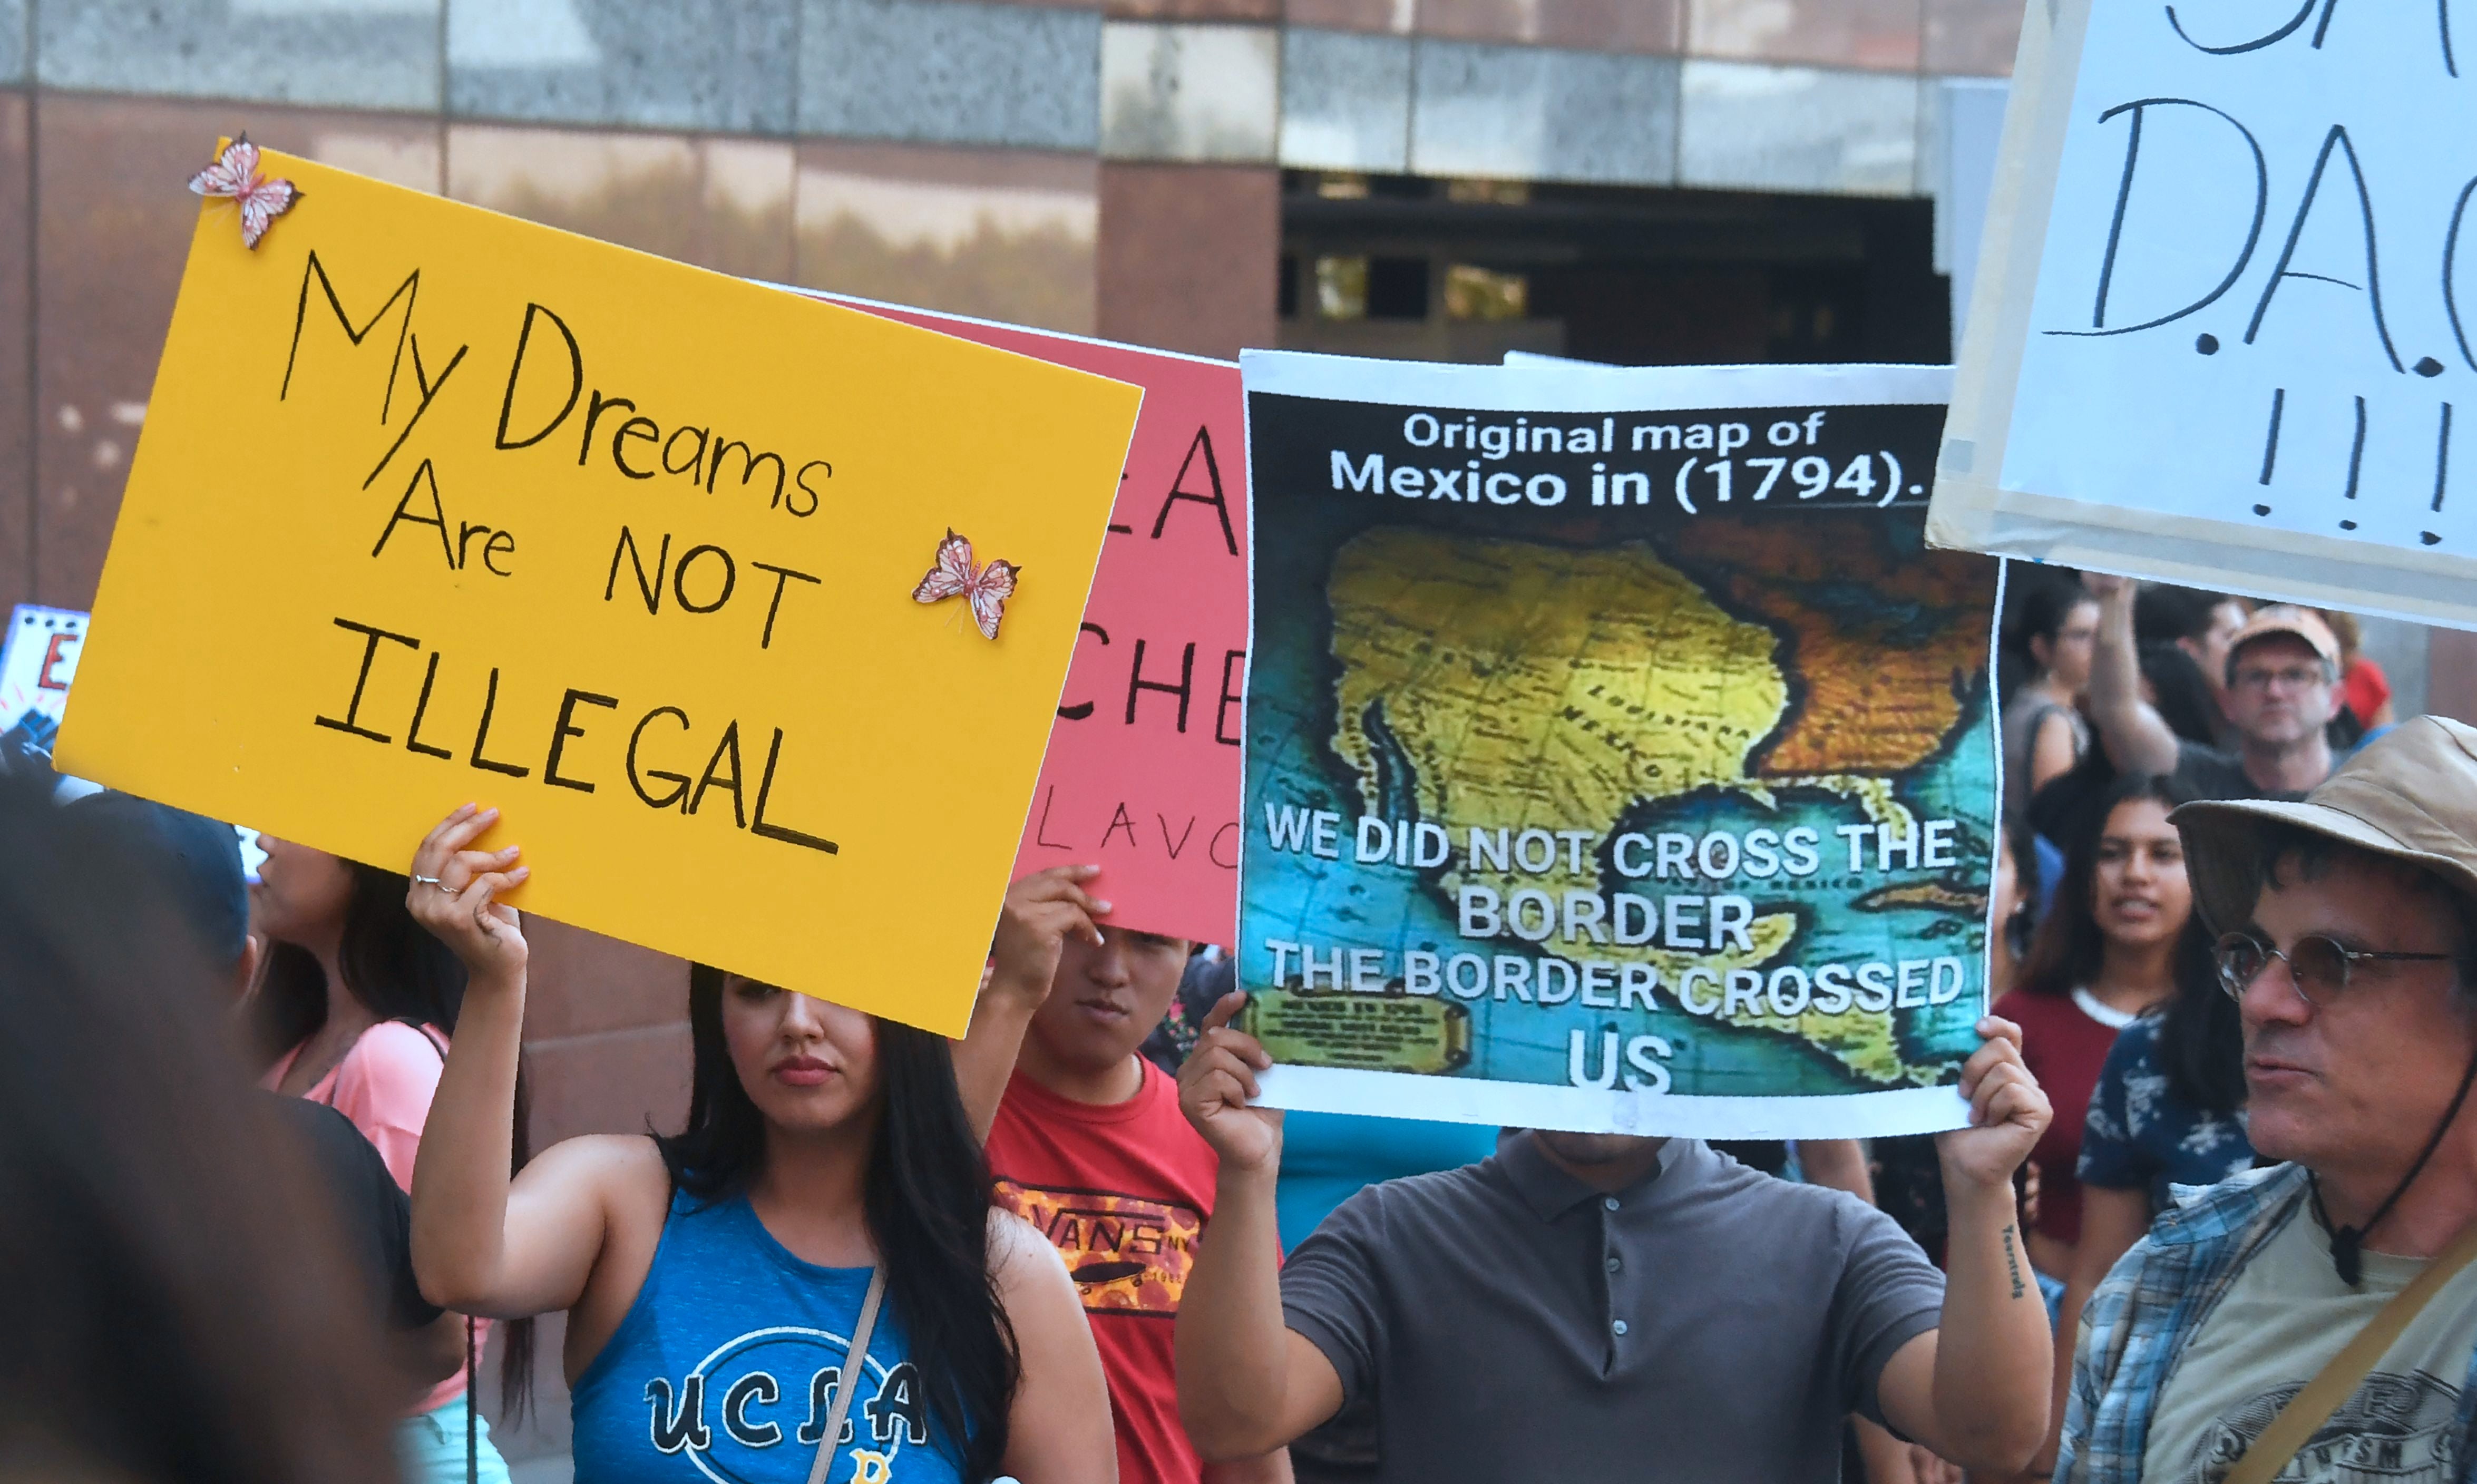 Here's How Much Money Rescinding DACA Could Cost The U.S. Economy
